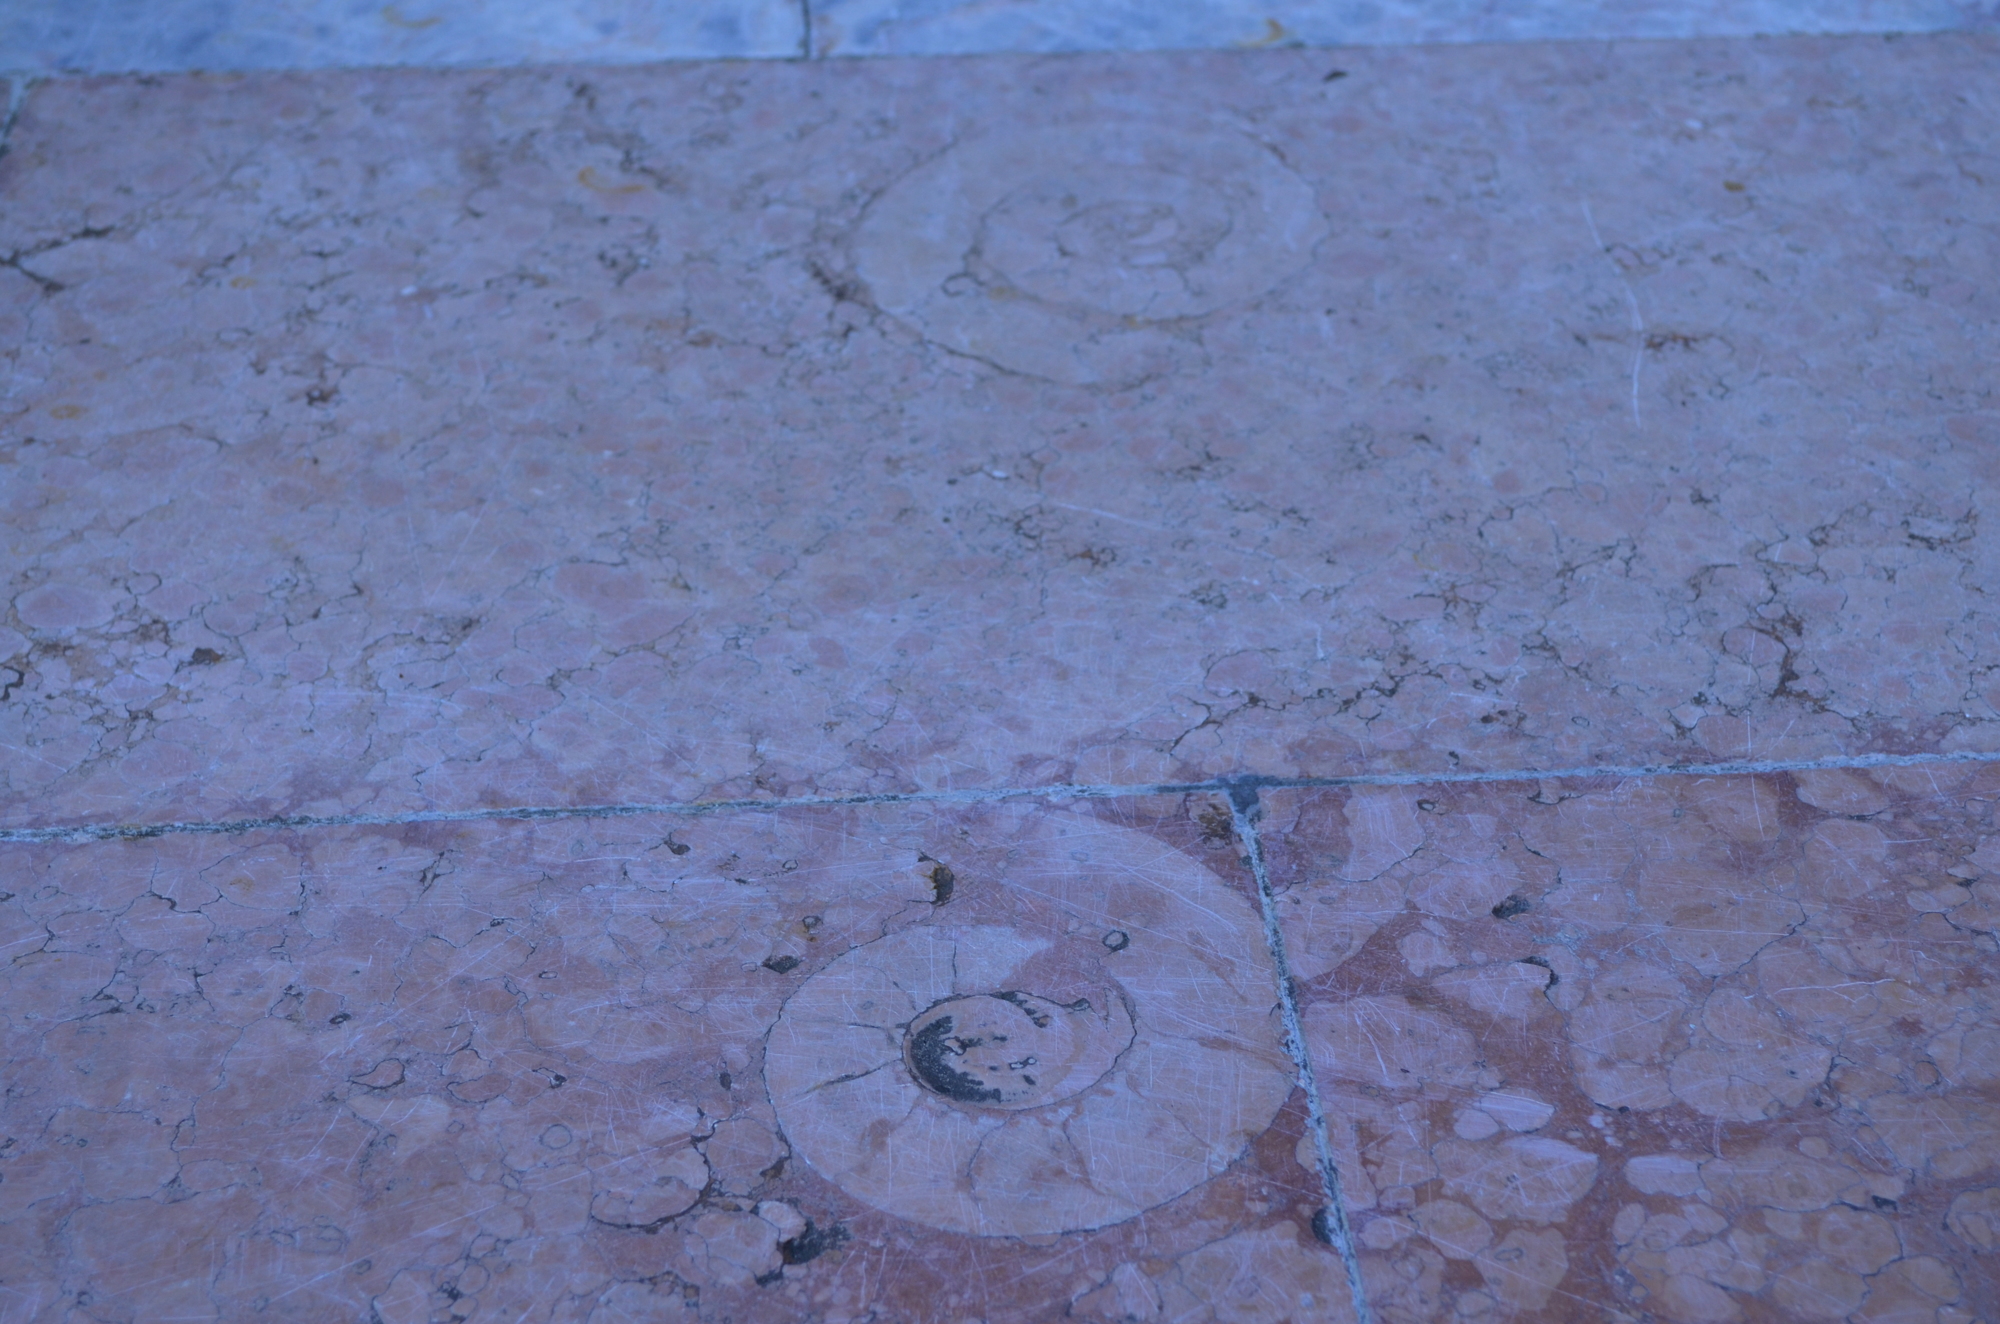 As the weather wears away the marble, it exposes fossils within.